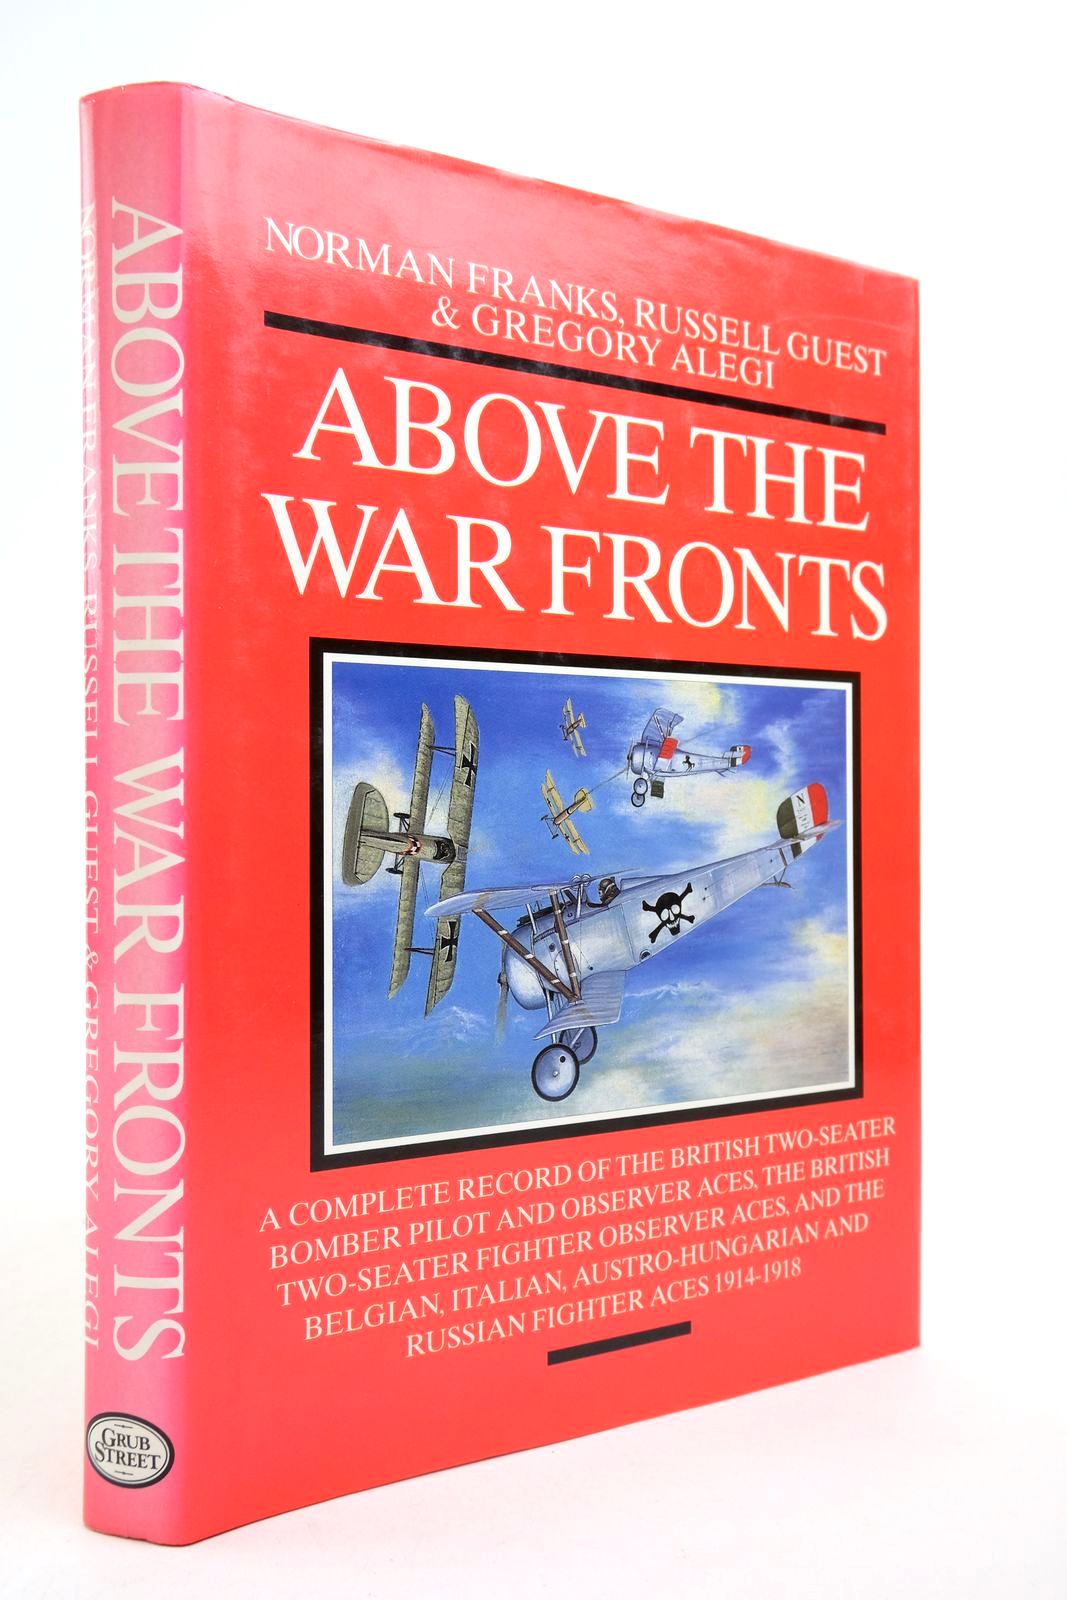 Photo of ABOVE THE WAR FRONTS written by Franks, Norman Guest, Russell Alegi, Gregory published by Grub Street (STOCK CODE: 2139804)  for sale by Stella & Rose's Books